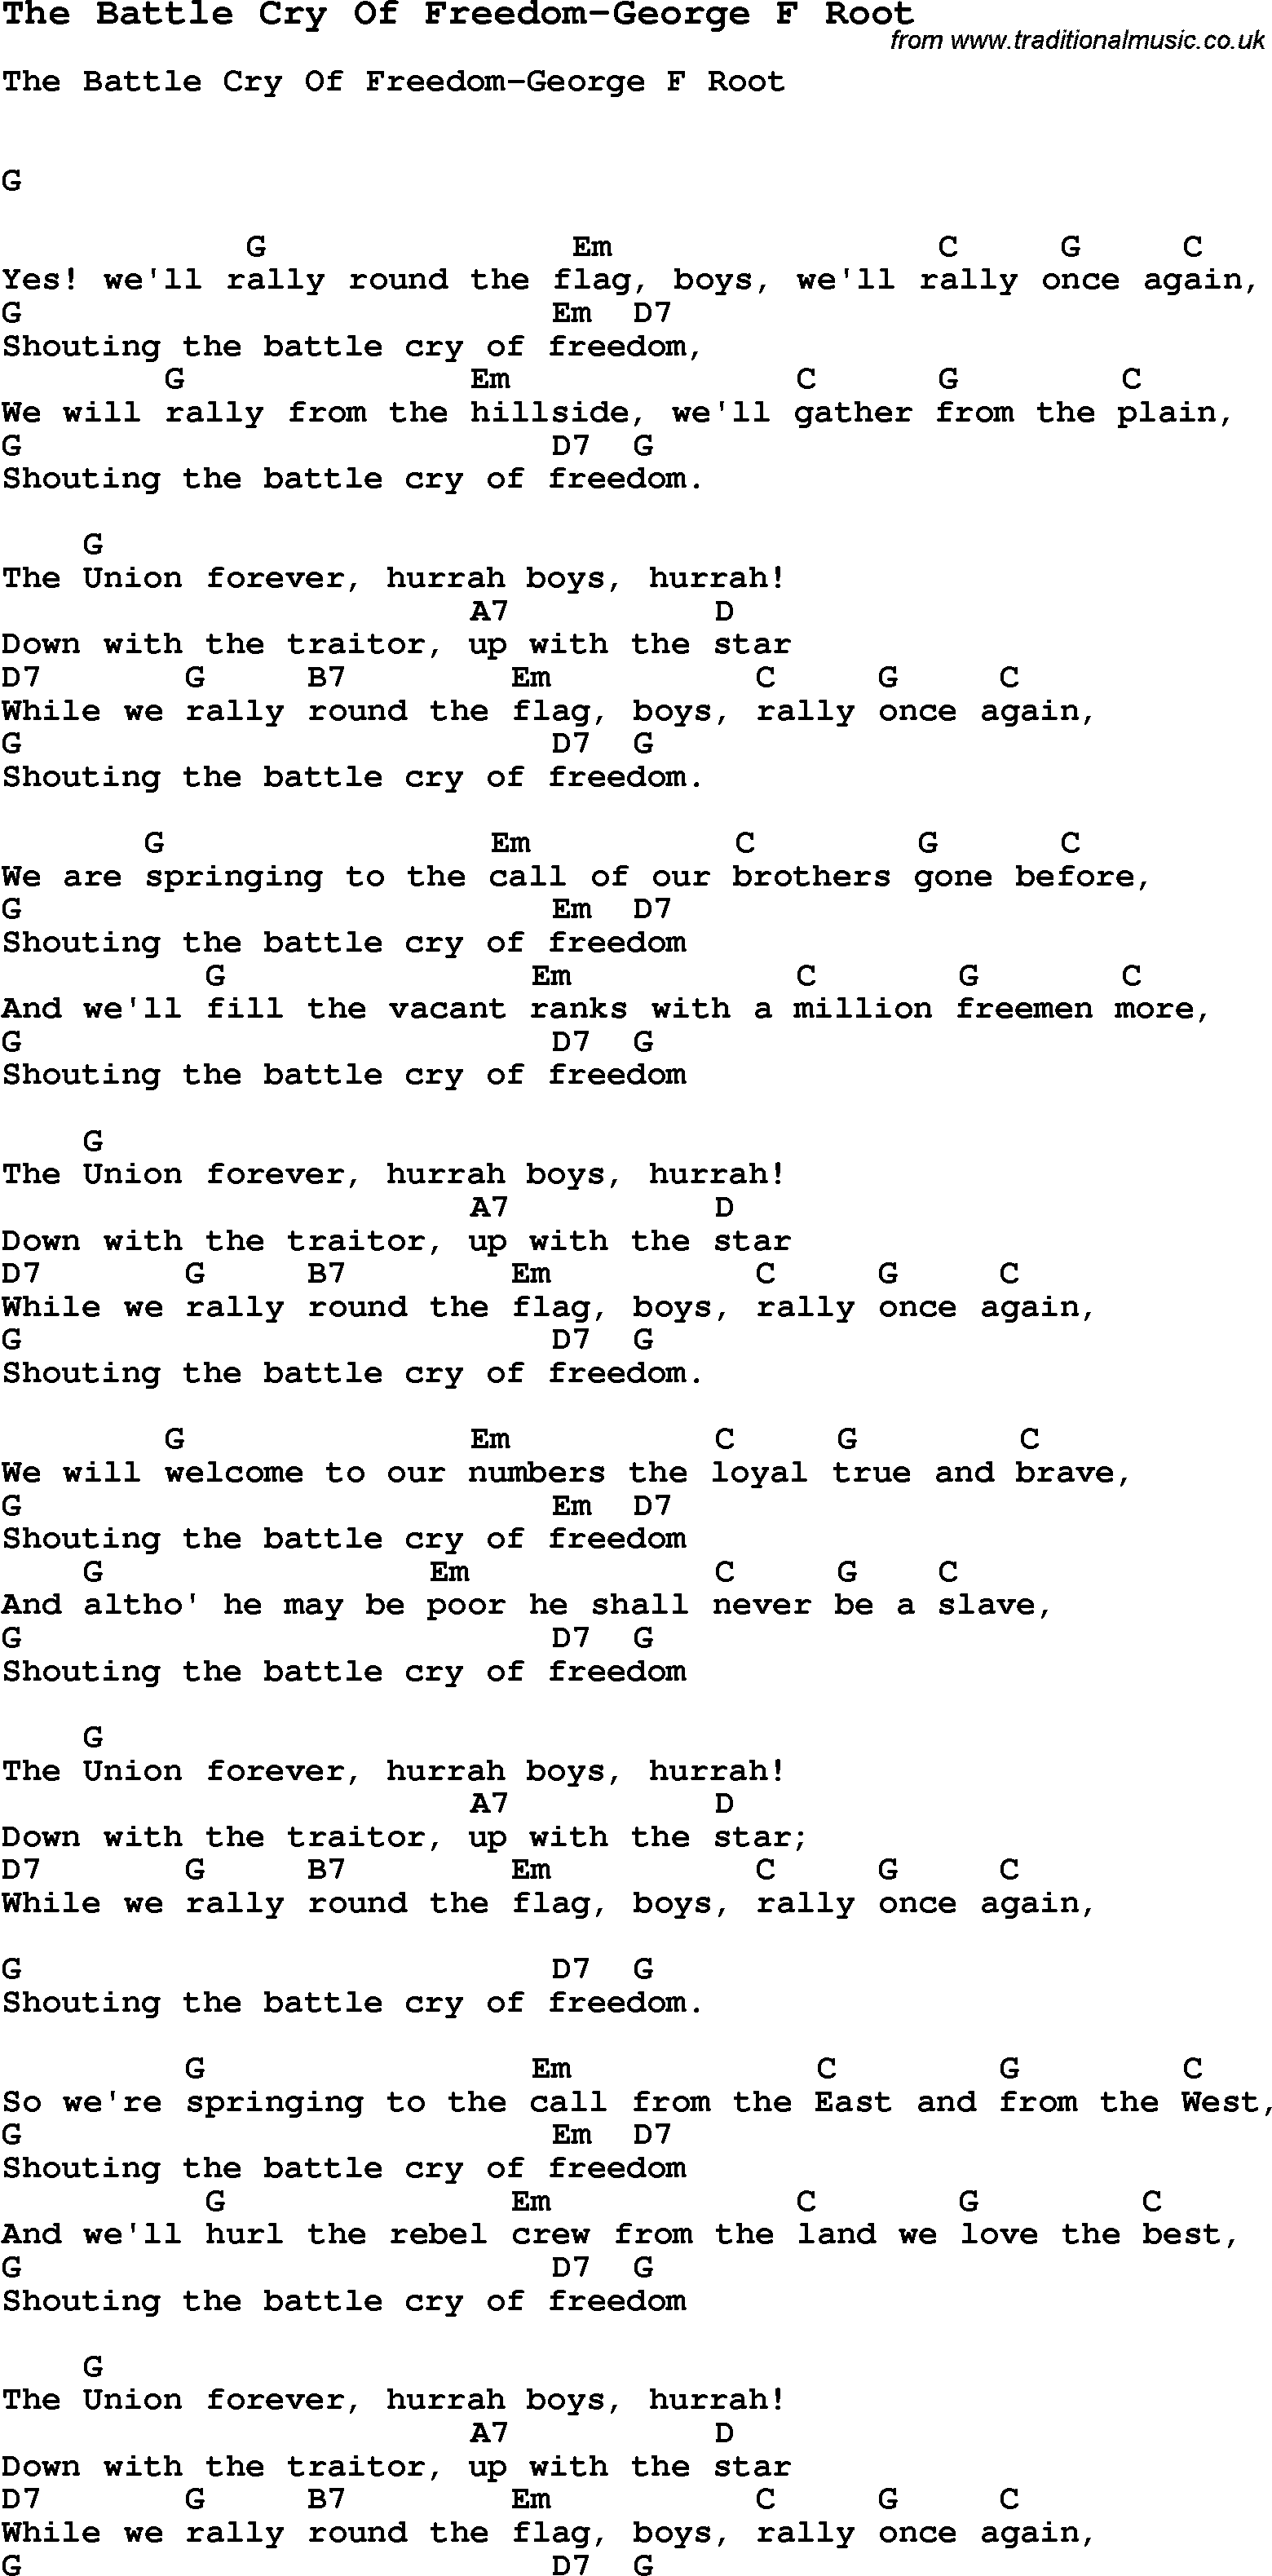 Summer-Camp Song, The Battle Cry Of Freedom-George F Root, with lyrics and chords for Ukulele, Guitar Banjo etc.